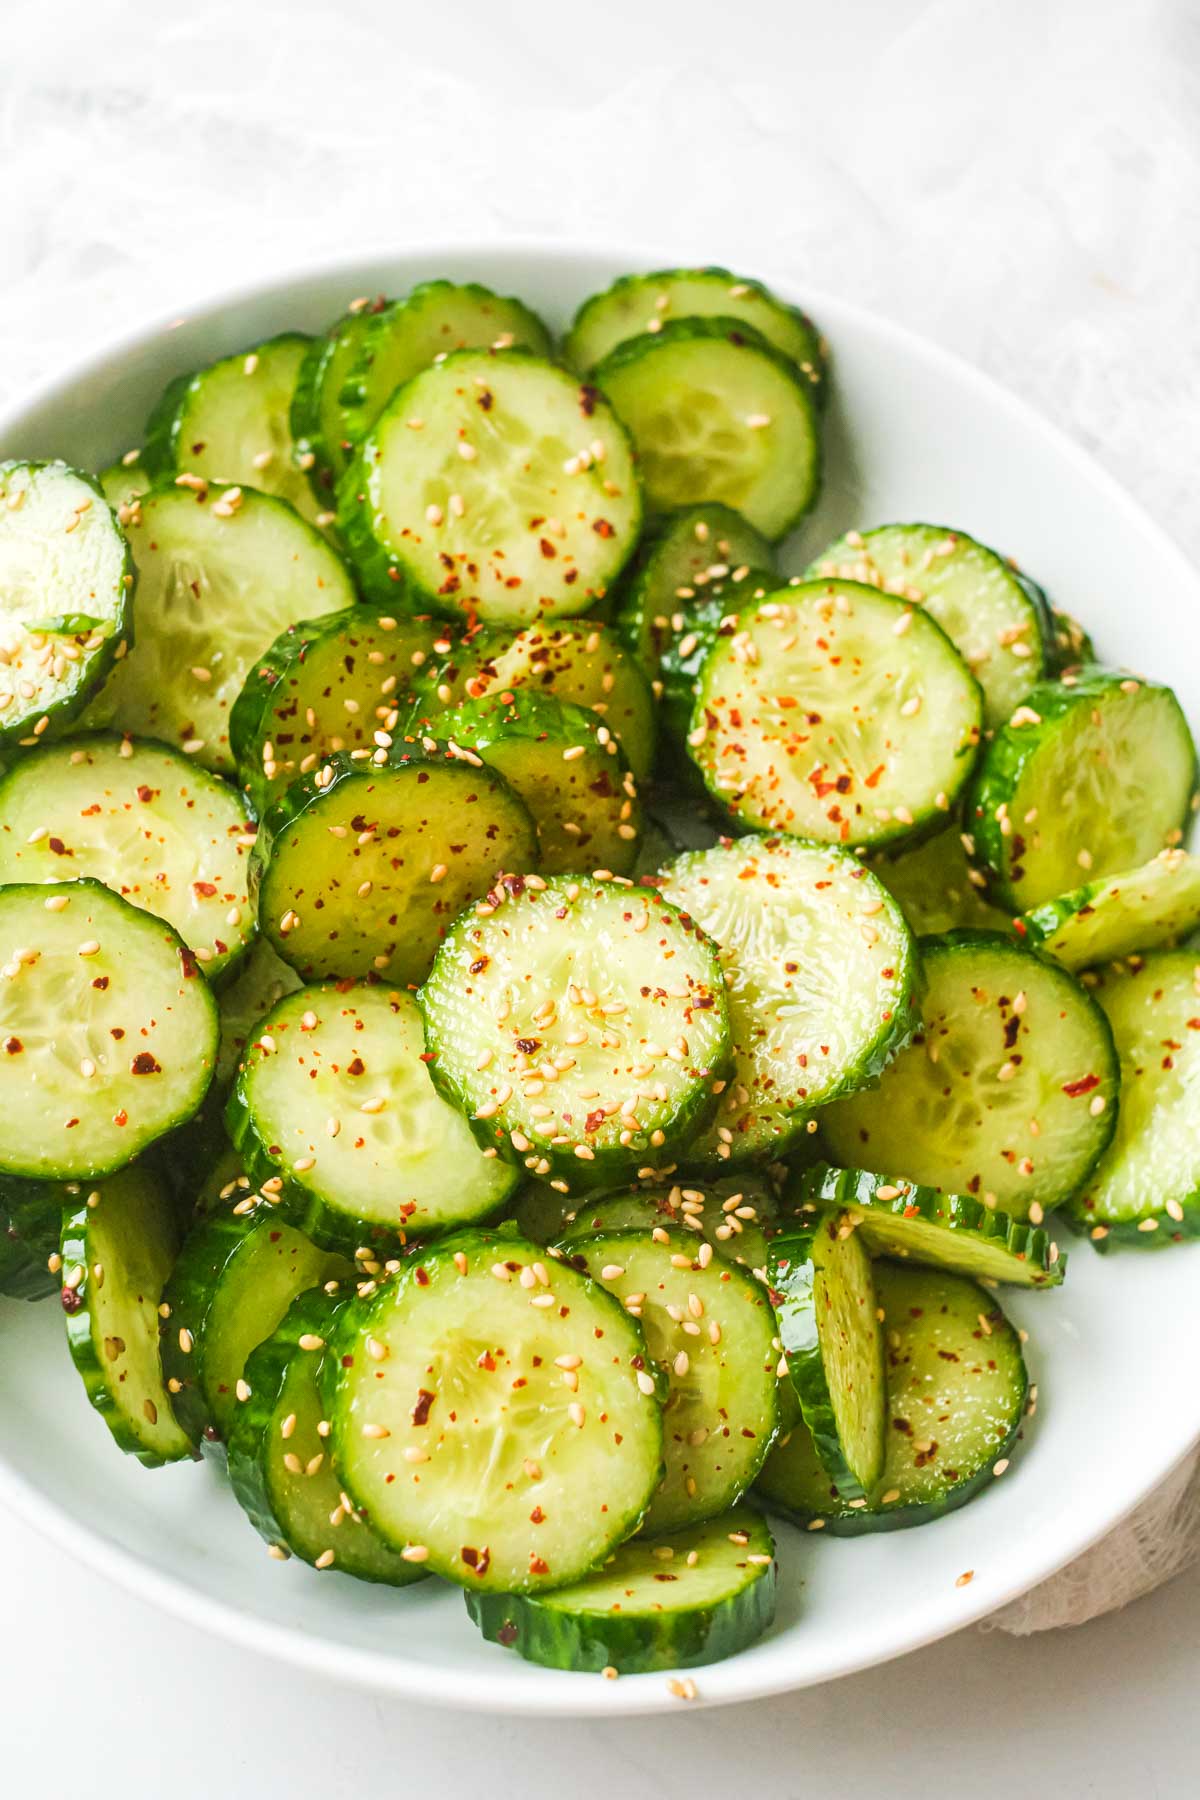 the finished asian cucumber salad recipe in a white serving bowl